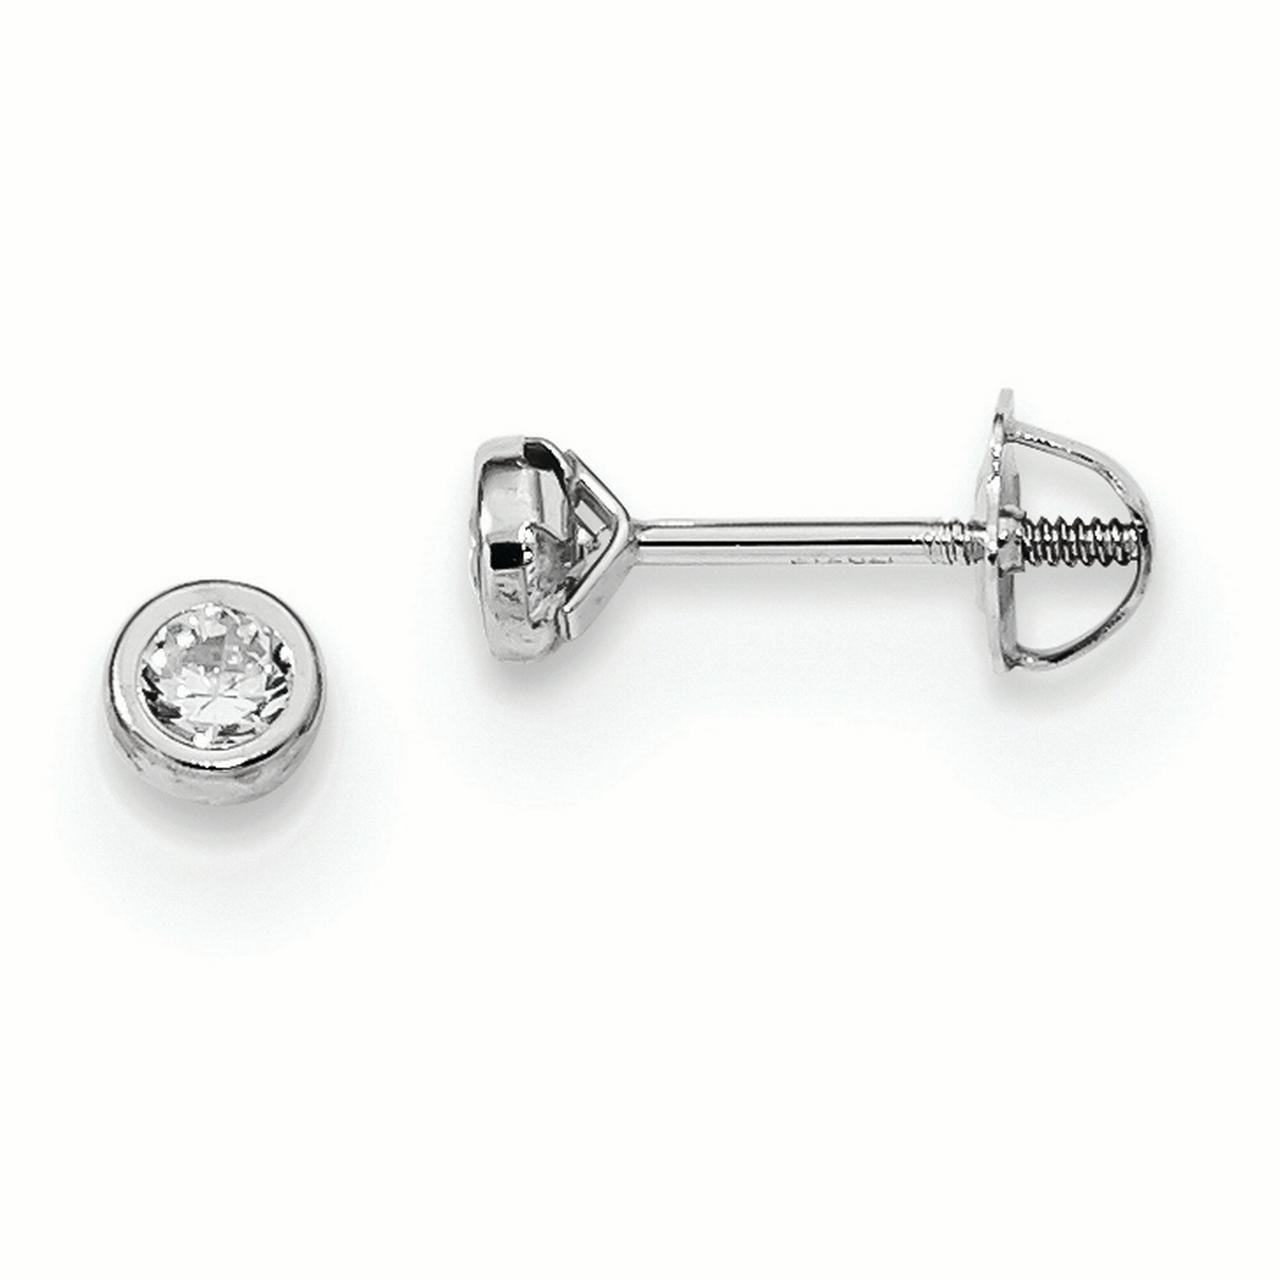 Details about   14K White Gold Madi K Children's 11 MM Dolphins Screw Back Stud Earrings 